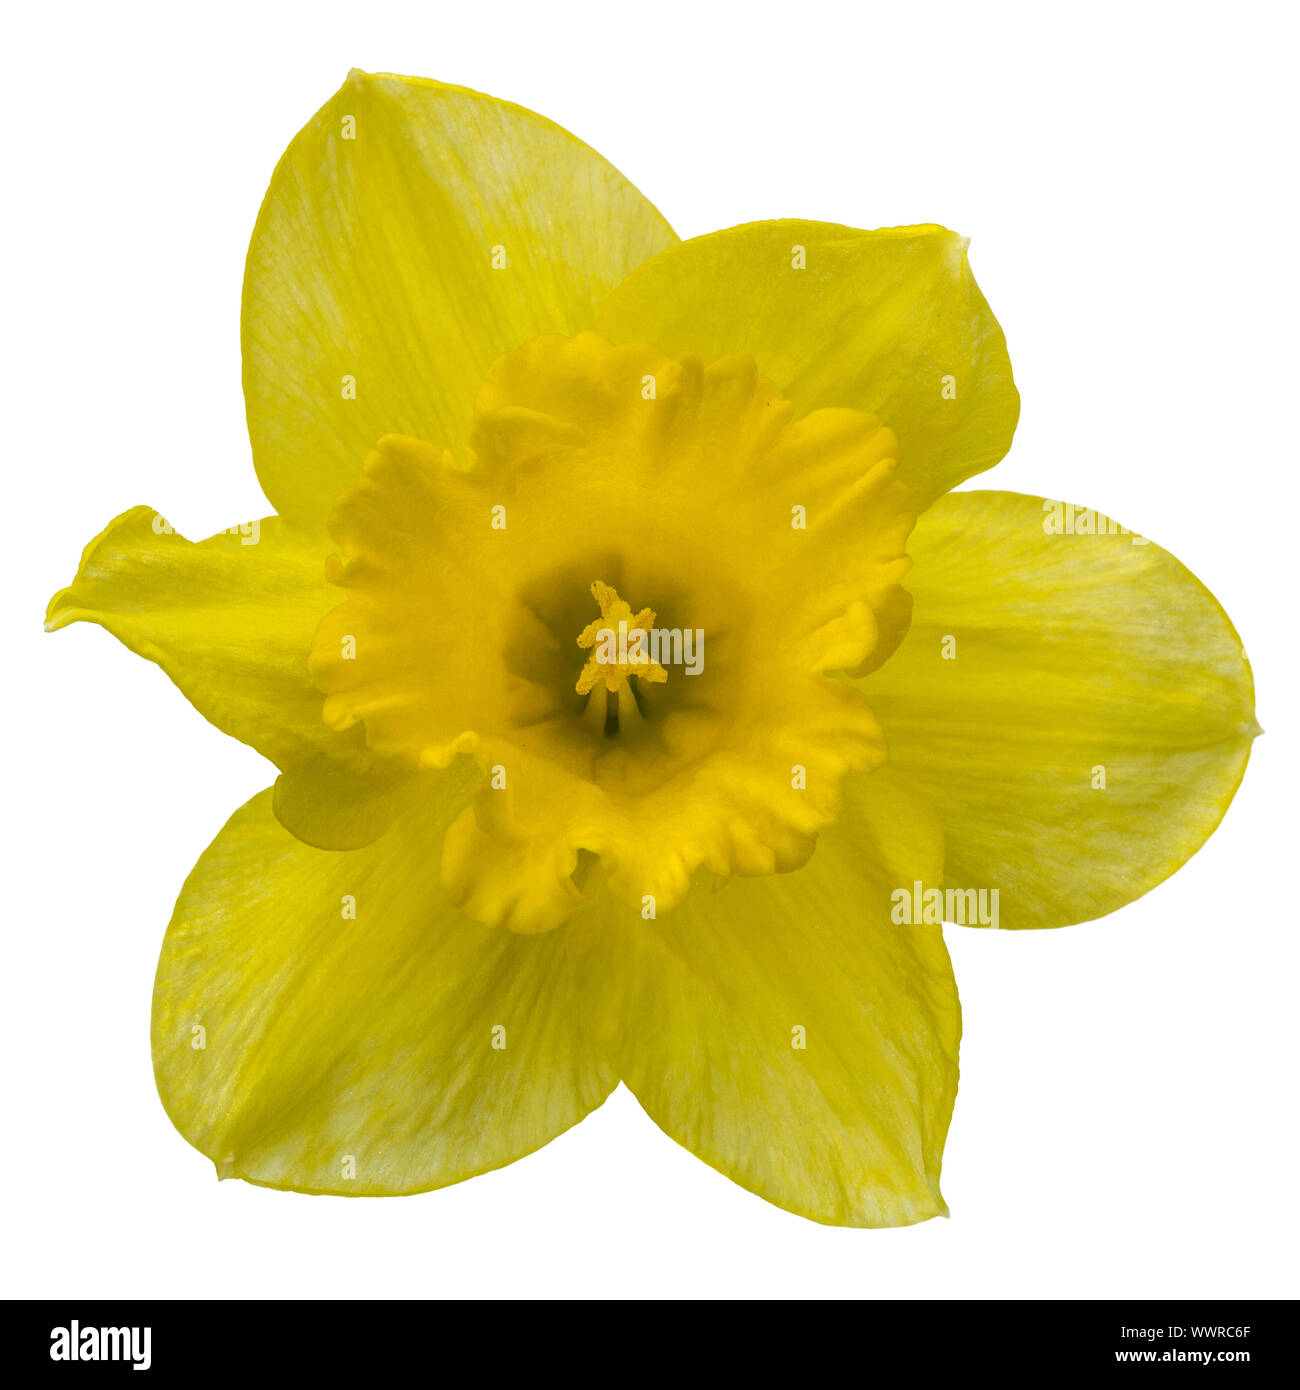 Flower of yellow Daffodil (narcissus) close-up, isolated on white background Stock Photo